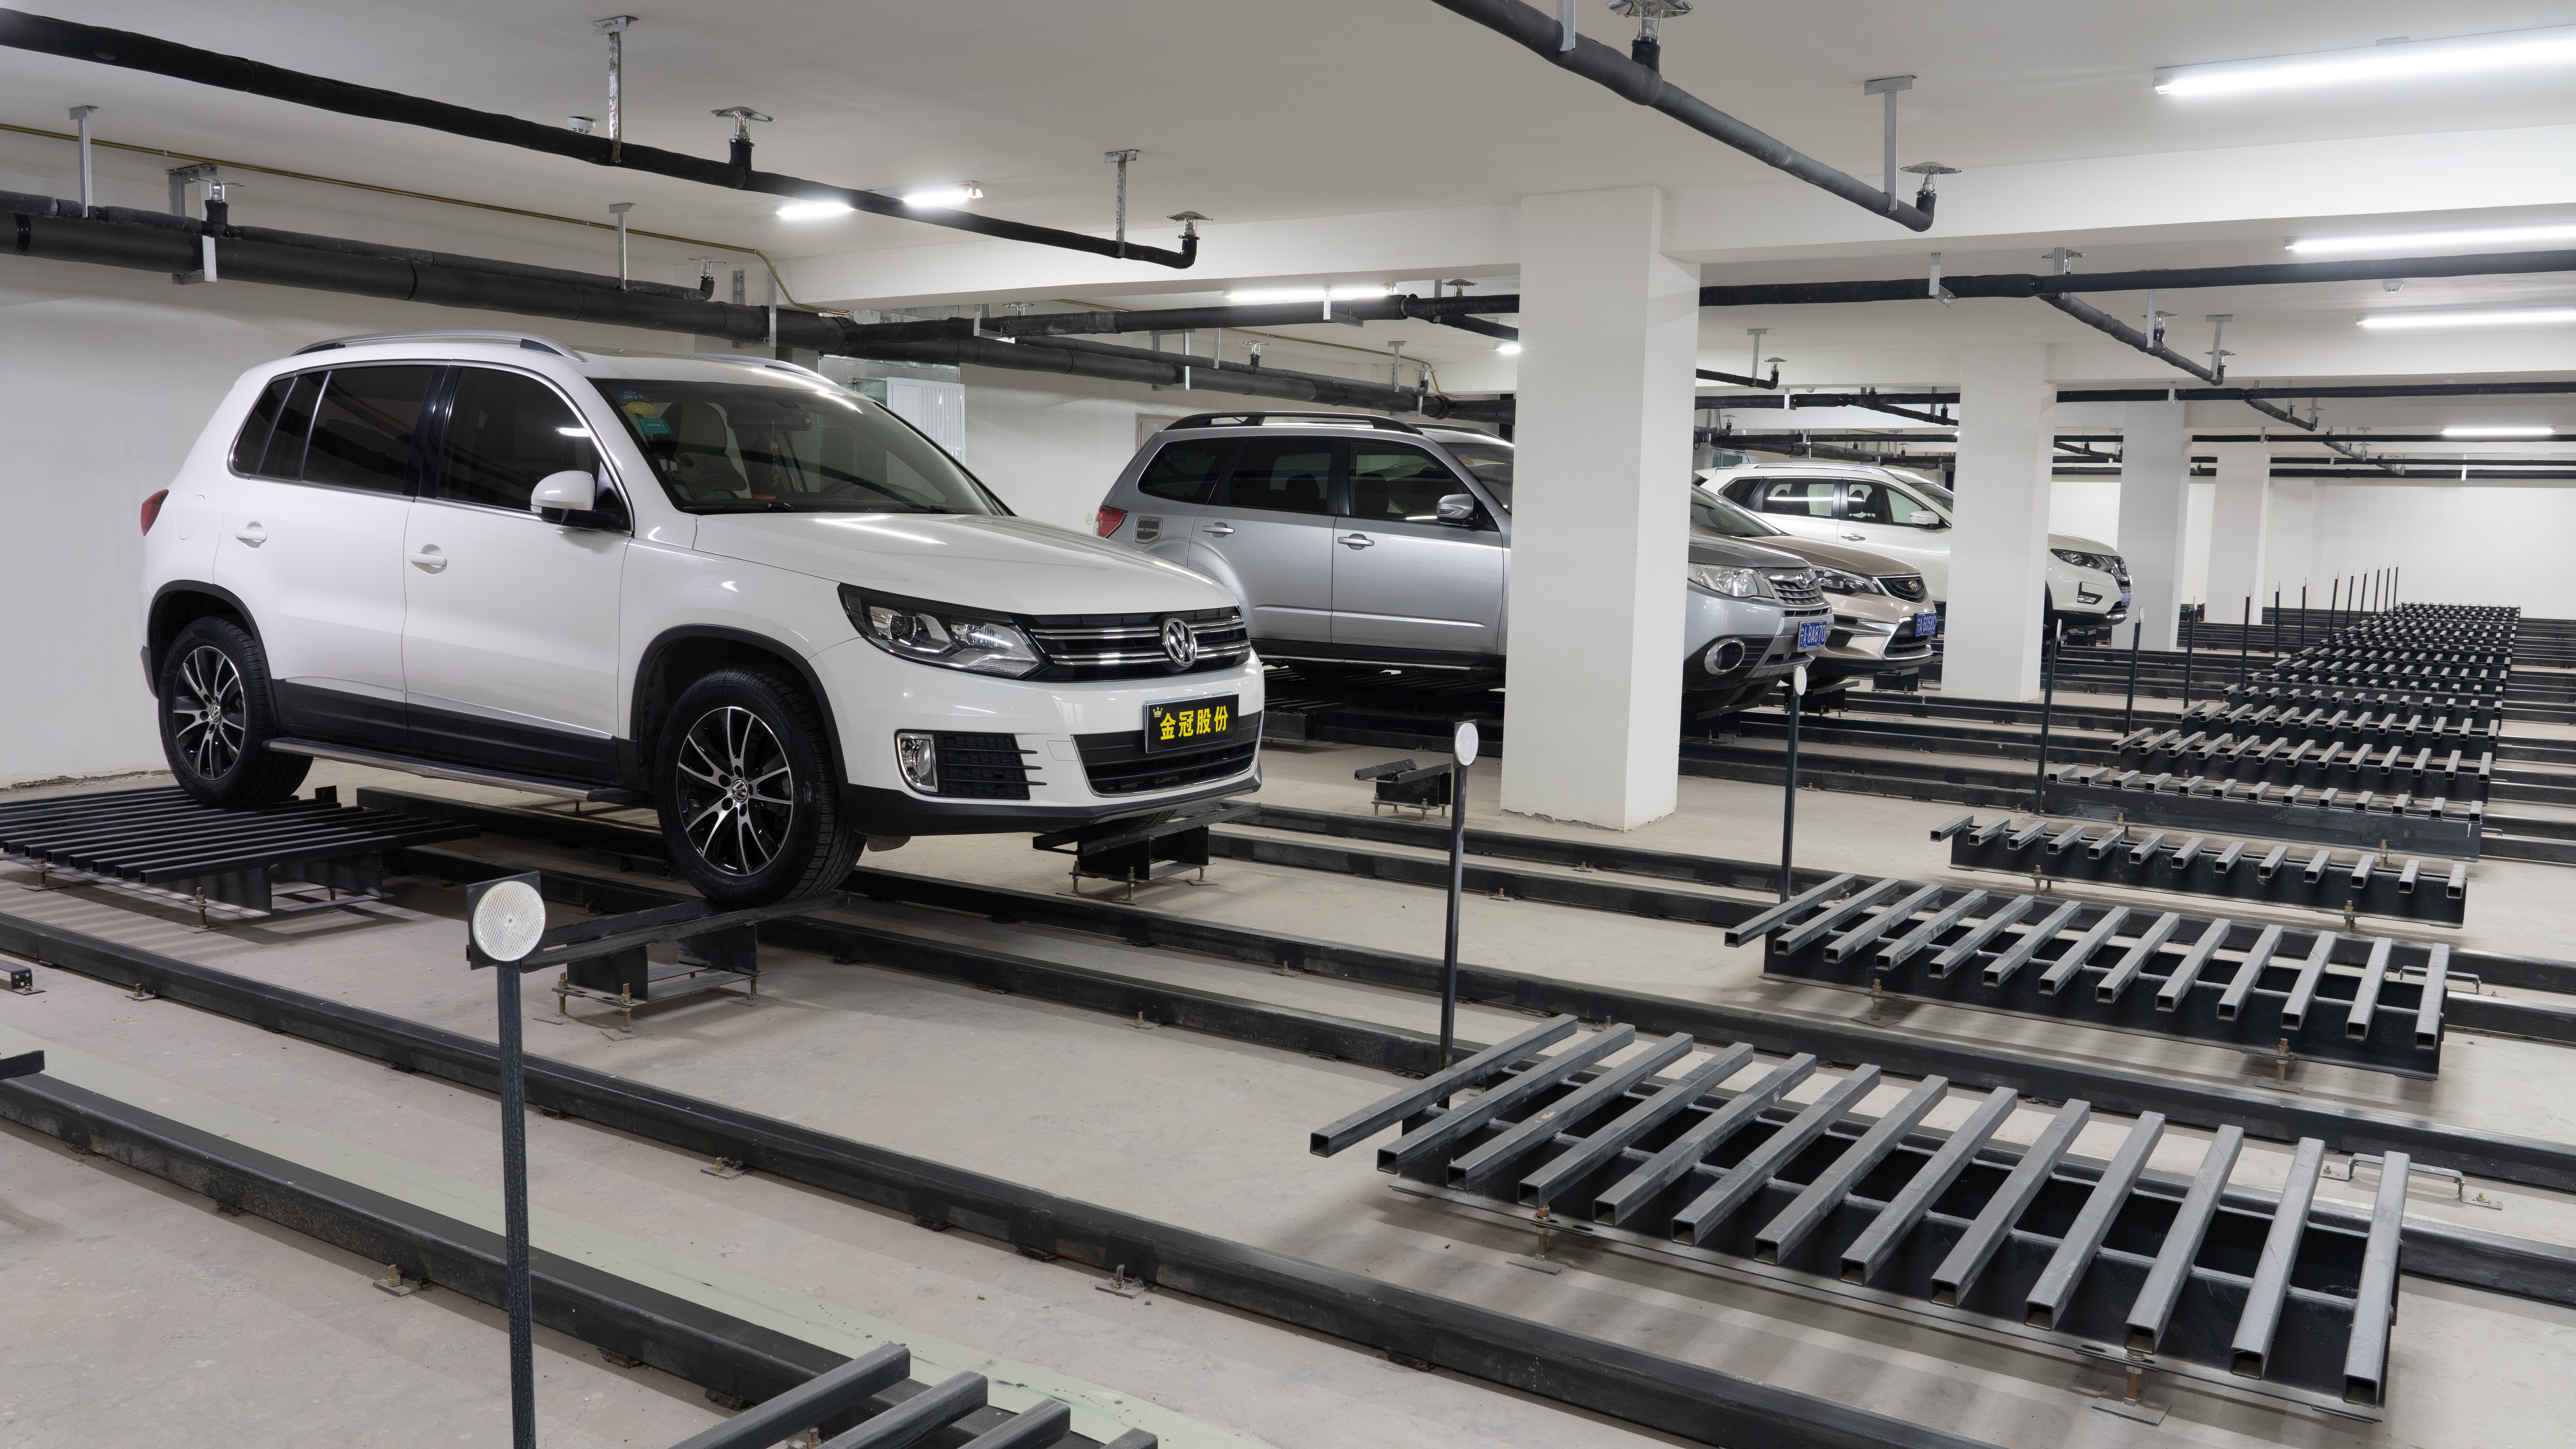 The Auto Park System Factory Jinguan Resumes Work After the New Year Holiday